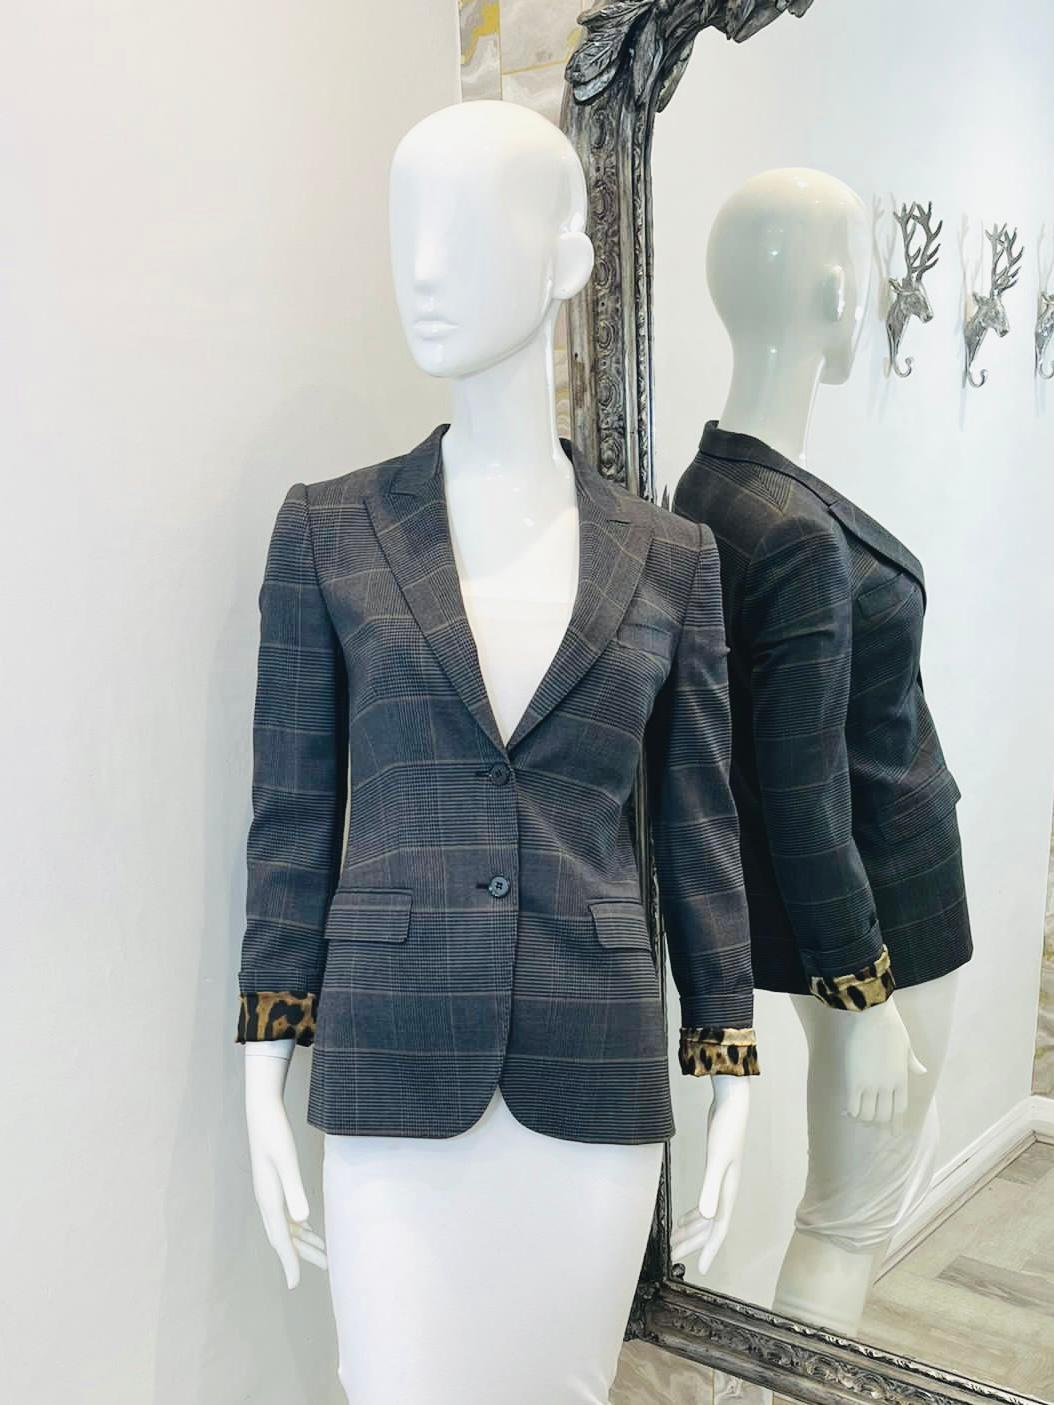 Dolce & Gabbana Prince Of Wales Check Wool Blazer

Grey check jacket in a English heritage style with button up closure and leopard print satin lining. Can be worn with cuffs showing print if desired. Flap pockets. Buttoned cuffs.

Size -